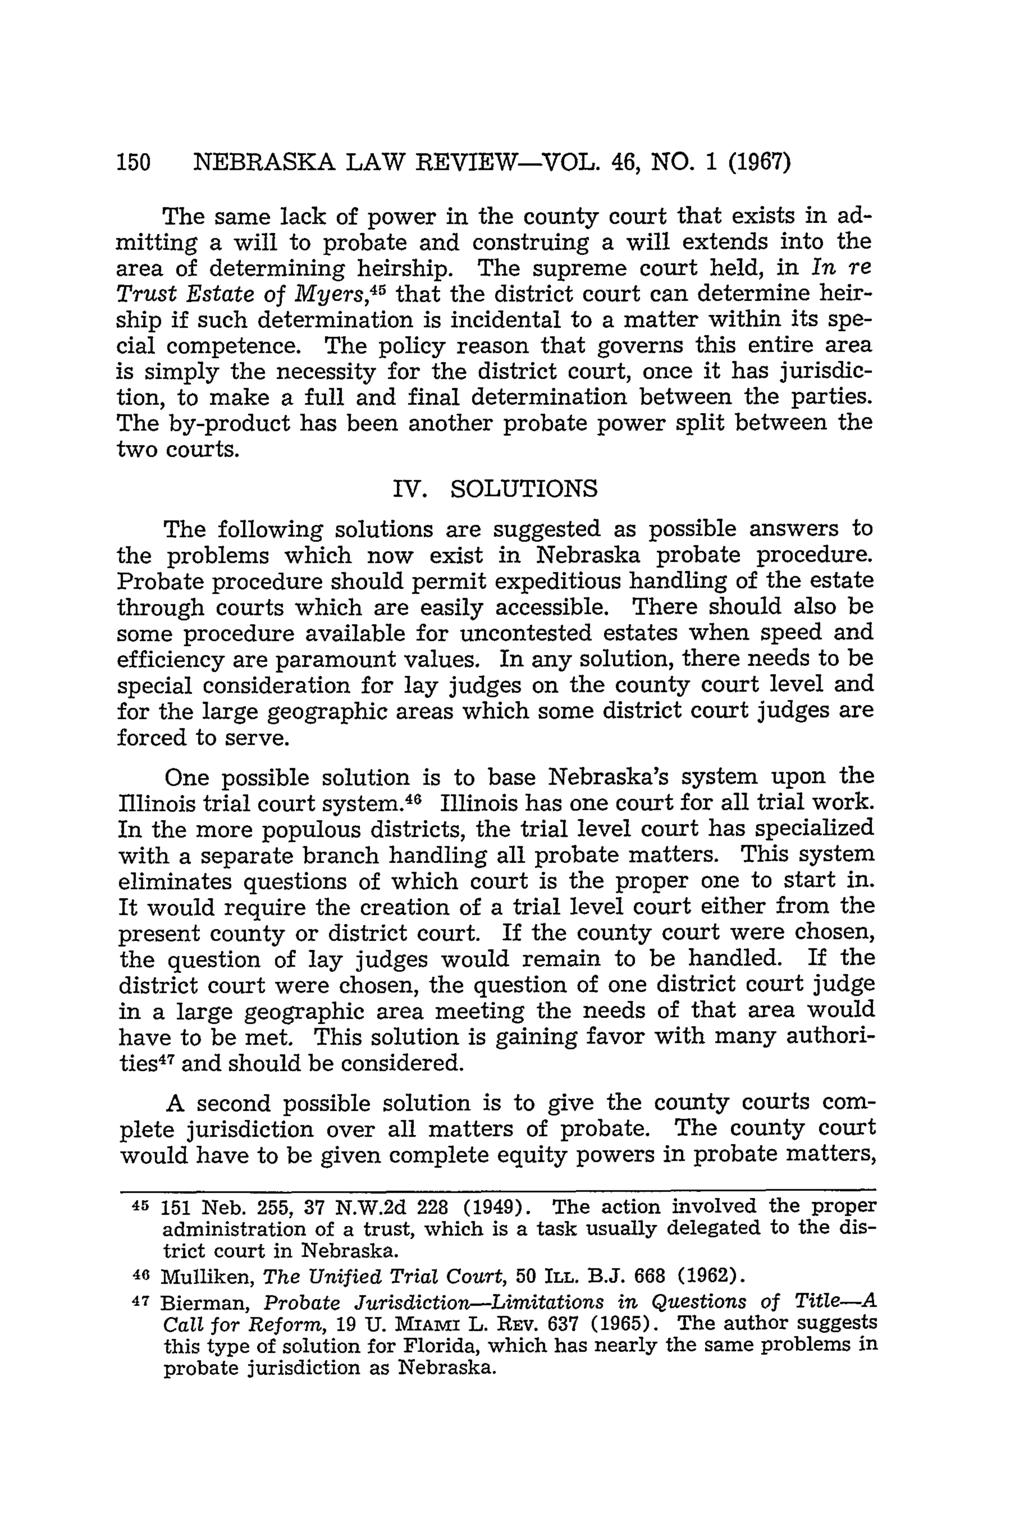 150 NEBRASKA LAW REVIEW-VOL. 46, NO. 1 (1967) The same lack of power in the county court that exists in admitting a will to probate and construing a will extends into the area of determining heirship.